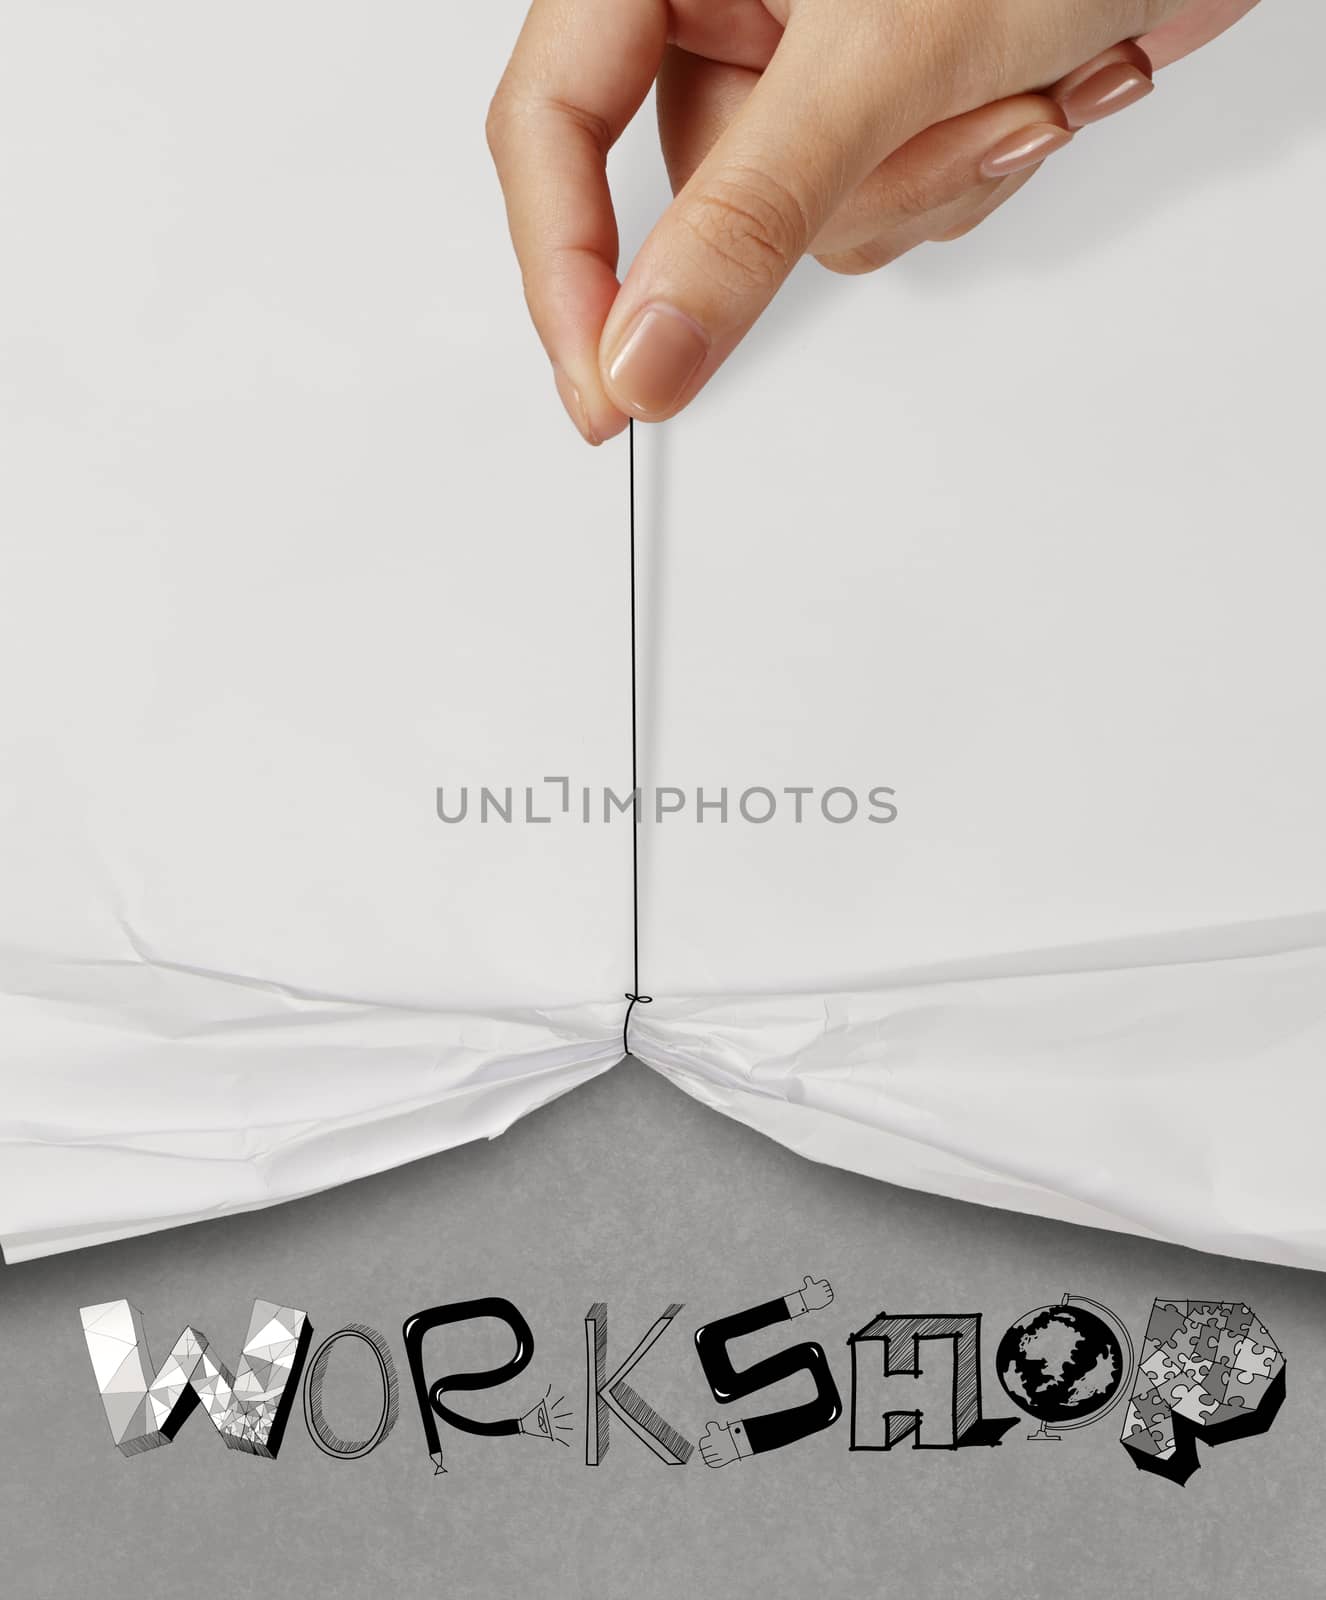 business hand pull rope open wrinkled paper show WORKSHOP design text as concept